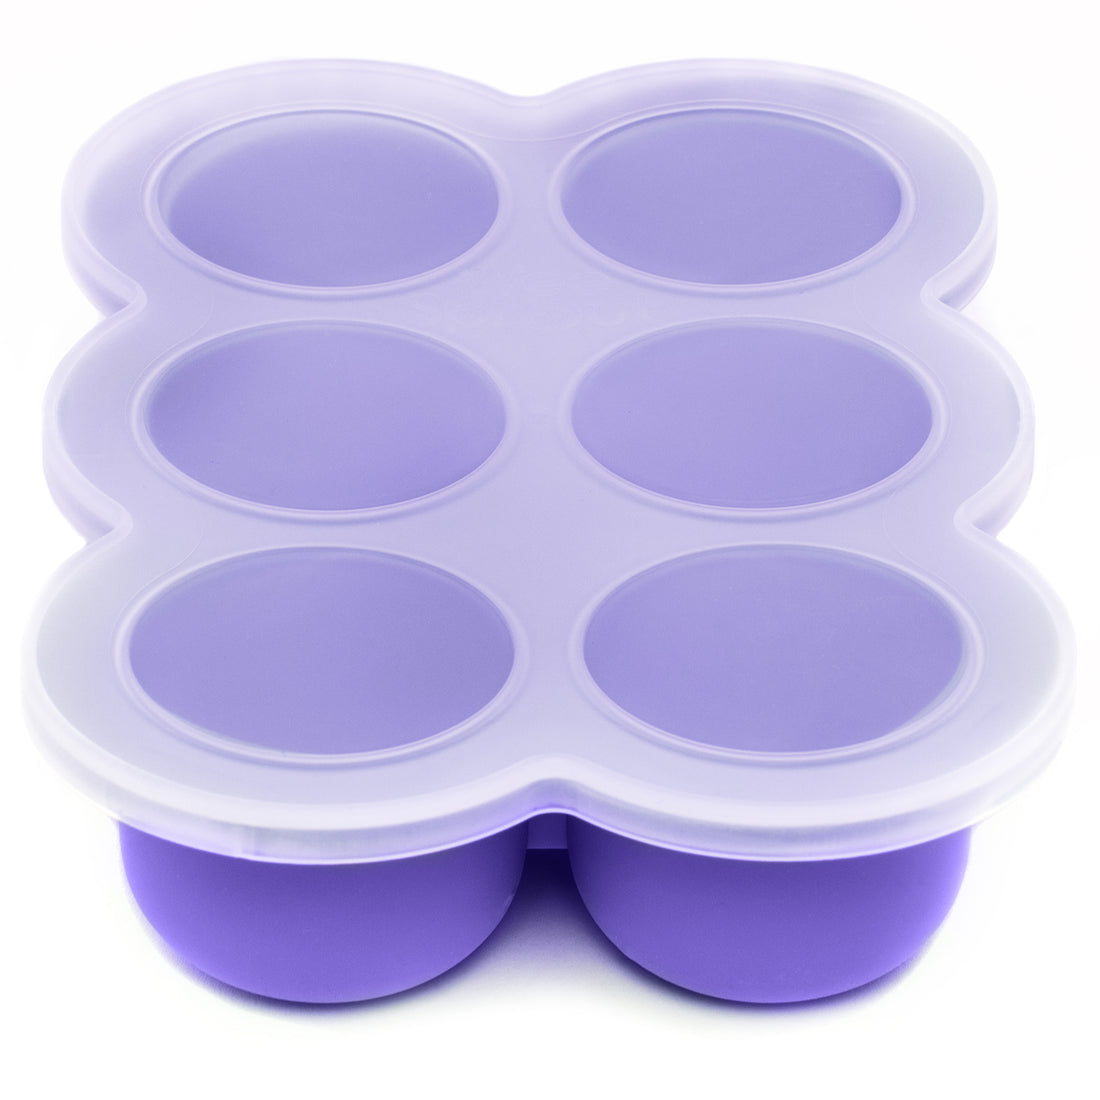 Food Freezer Tray, Peunitory Baby Popsicle Molds Baby Food Storage